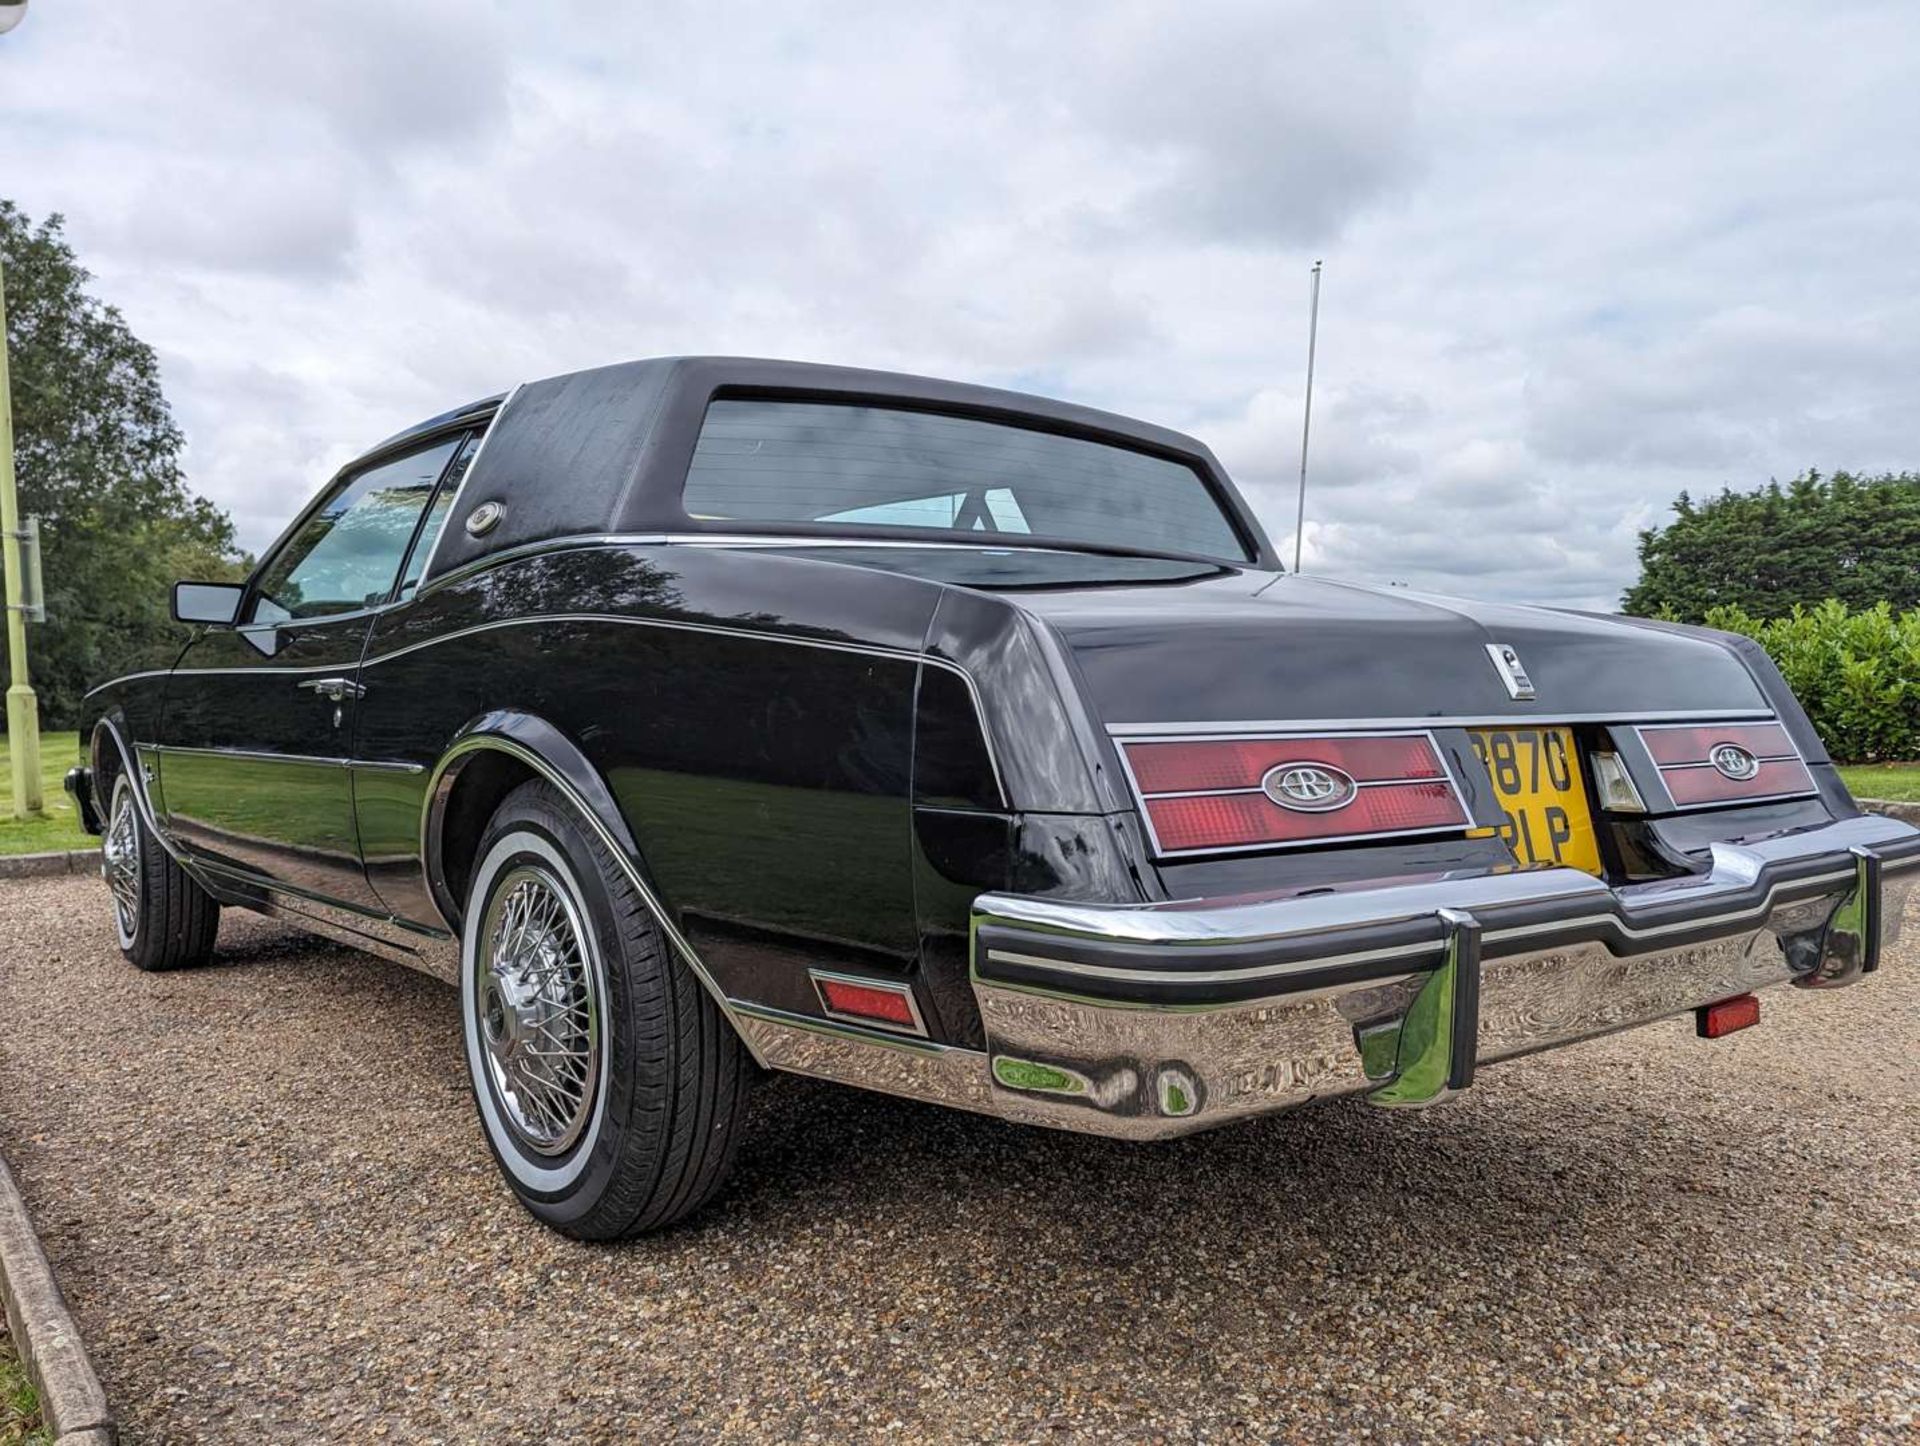 1985 BUICK RIVIERA LHD - Image 11 of 30